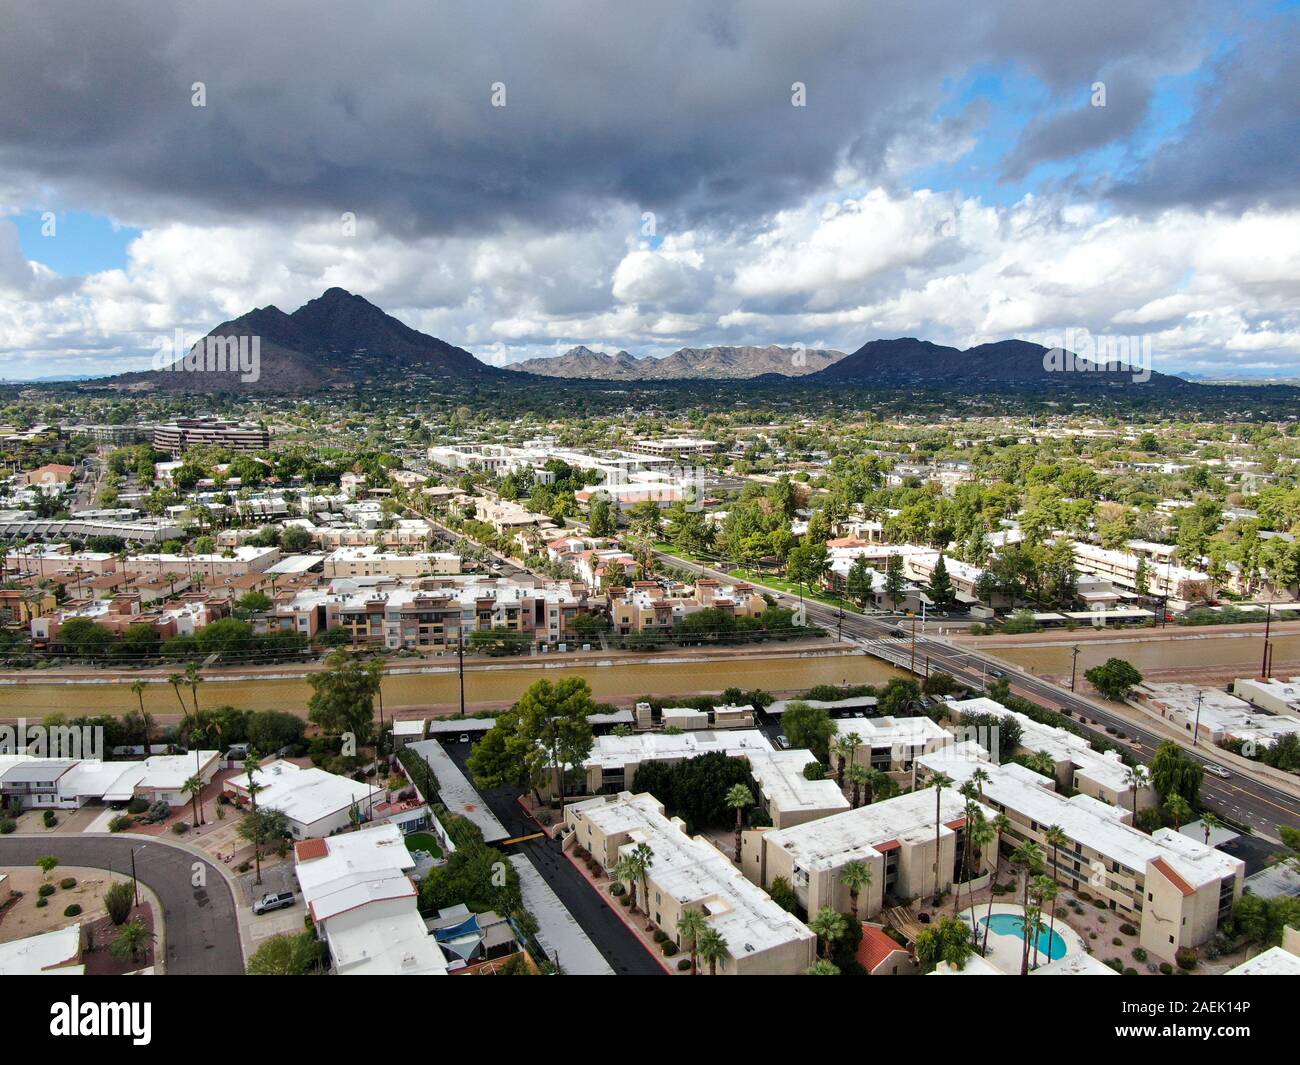 Aerial View Of Mega Shopping Mall In Scottsdale, Desert City In Arizona  East Of State Capital Phoenix. Downtown's Old Town Scottsdale. Phoneix, USA  November, 25th, 2019 Stock Photo, Picture and Royalty Free